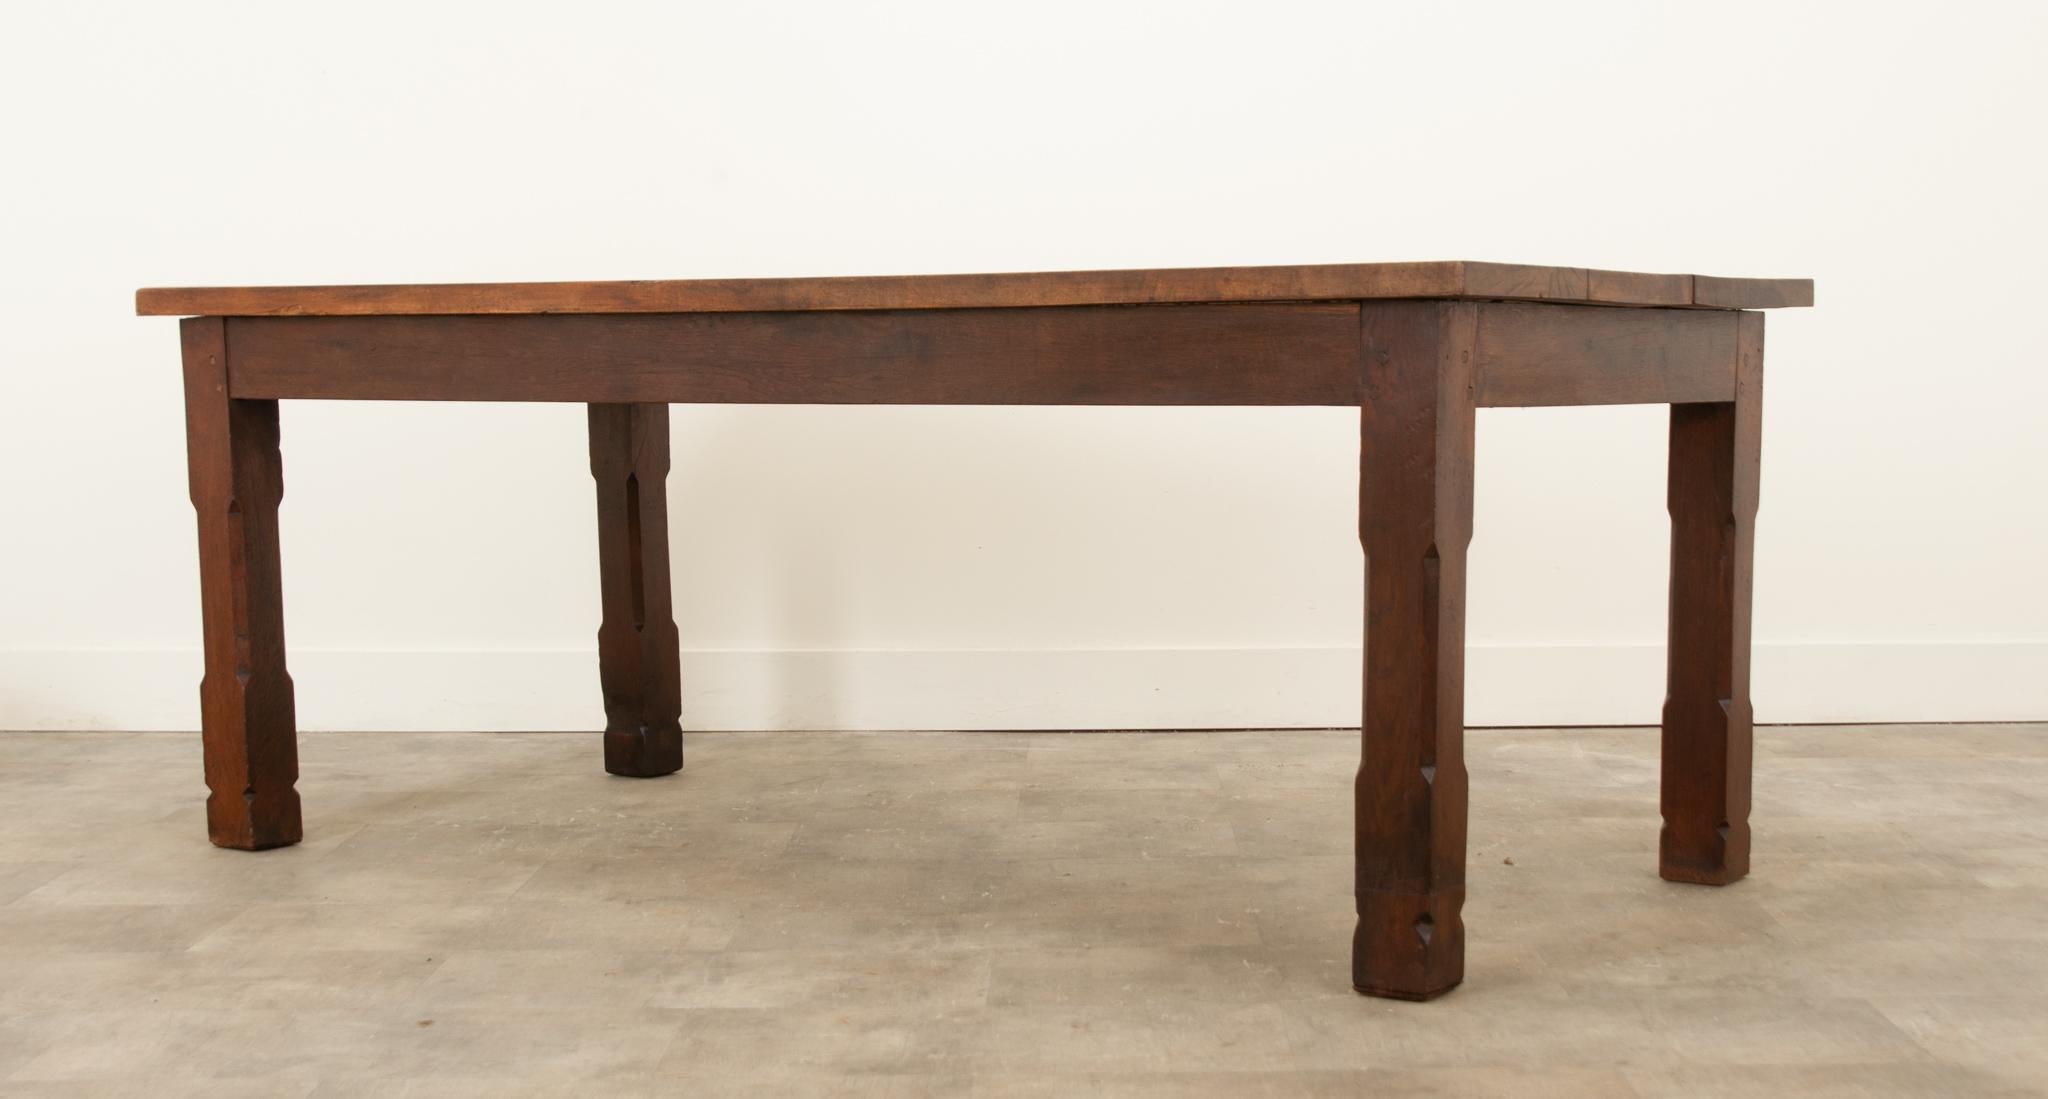 A 19th century French farmhouse table made from oak and walnut. The top is made from three solid oak planks supported on a walnut base, which has a simple apron that follows down to streamlined, well supported,  chamfered and squared legs. This